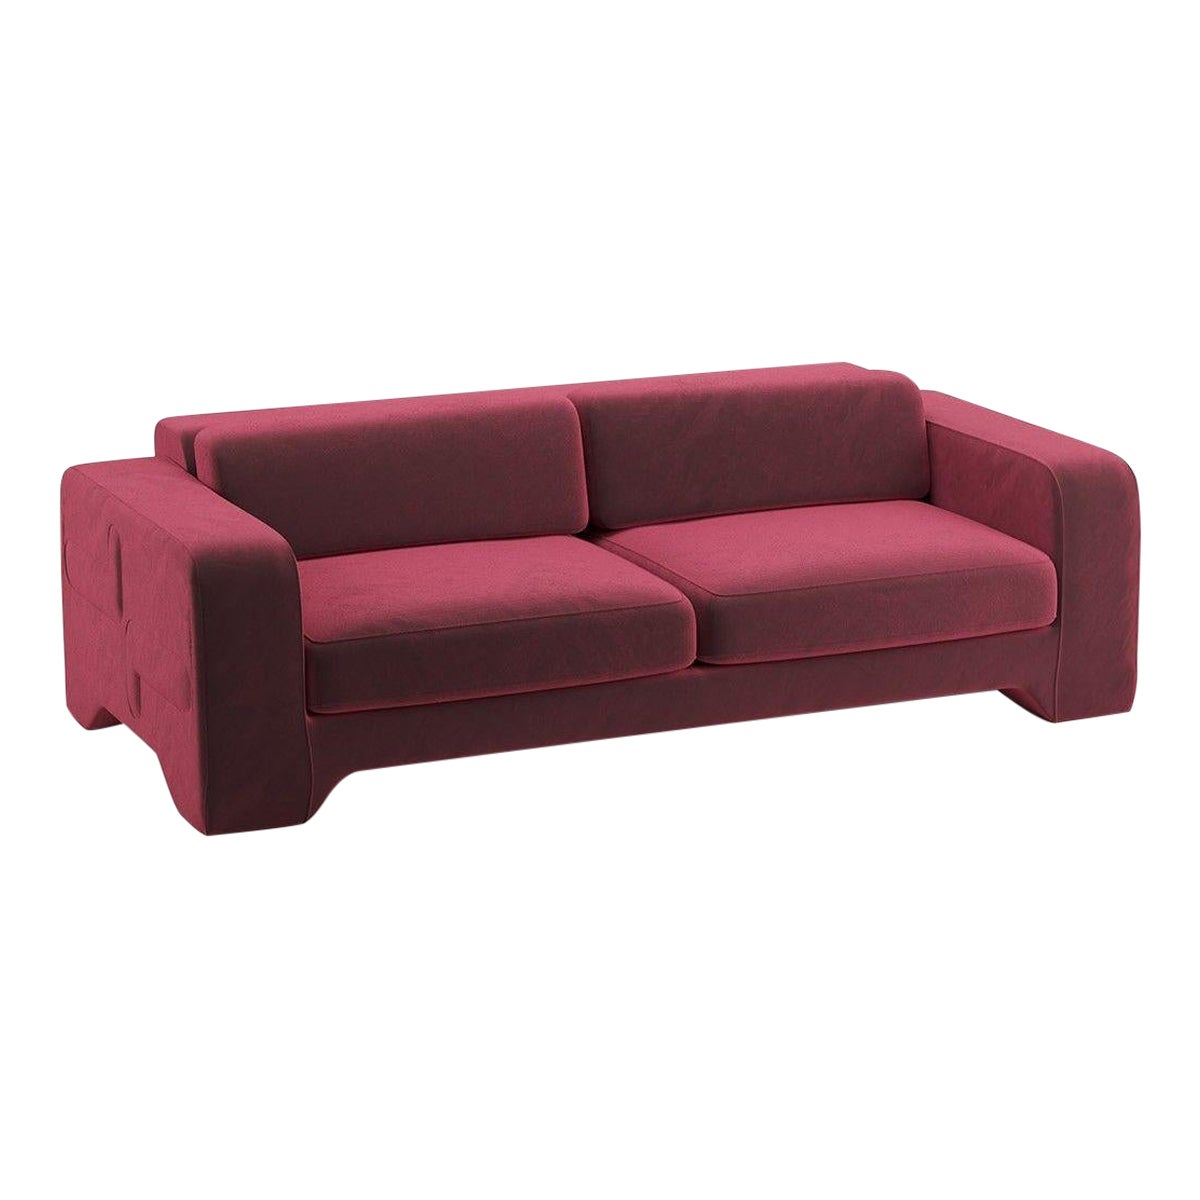 Popus Editions Giovanna 4 Seater Sofa in Red Como Velvet Upholstery For Sale